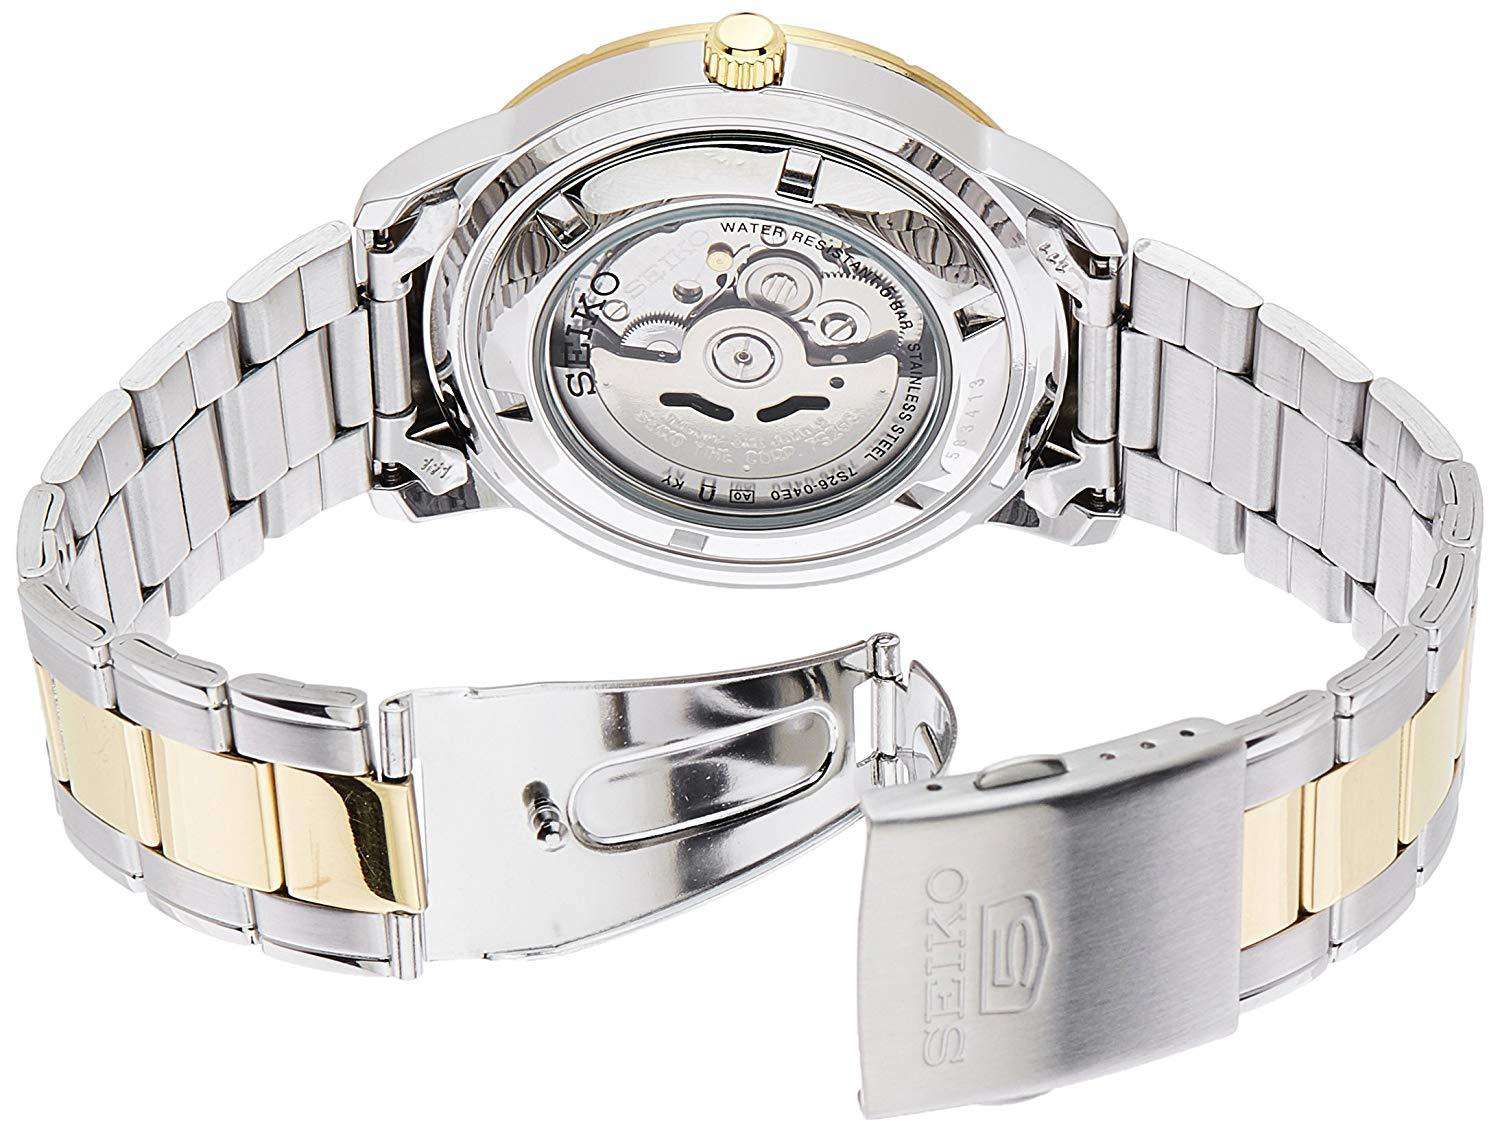 SEIKO SNKN58K1 Automatic Two Tone Stainless Steel Watch for Men-Watch Portal Philippines